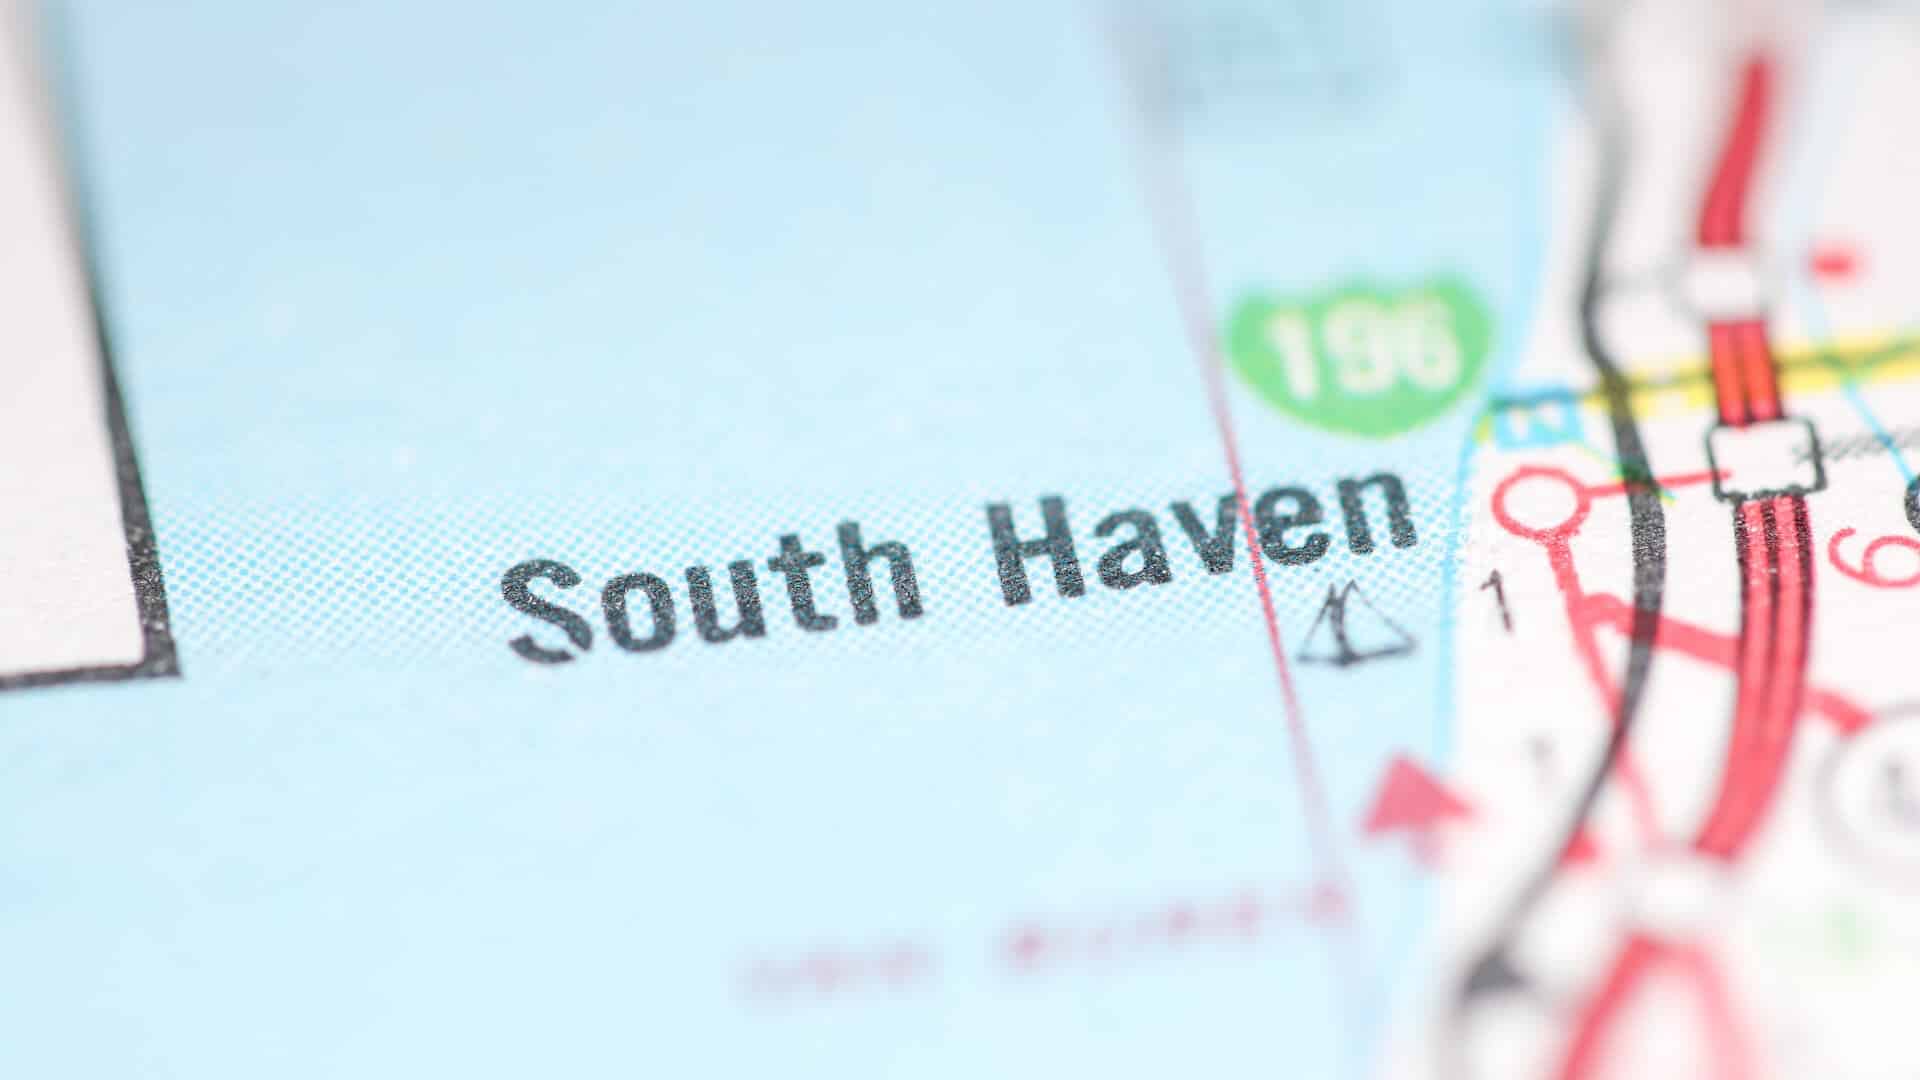 A map with South Haven as a destination point